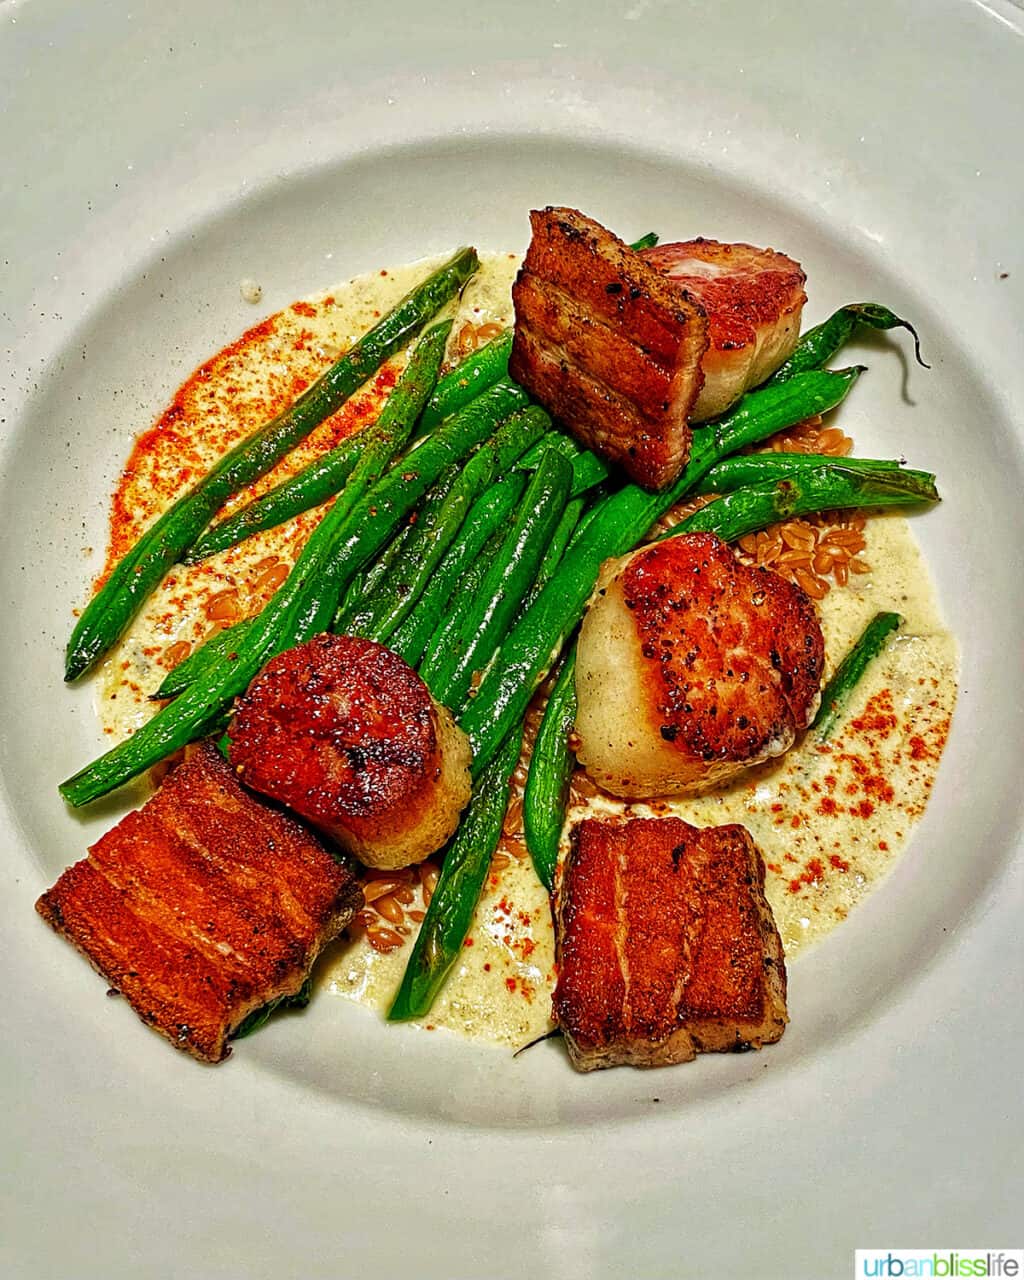 scallops and pork belly at Earth and Sea restaurant in Carlton, Oregon wine country